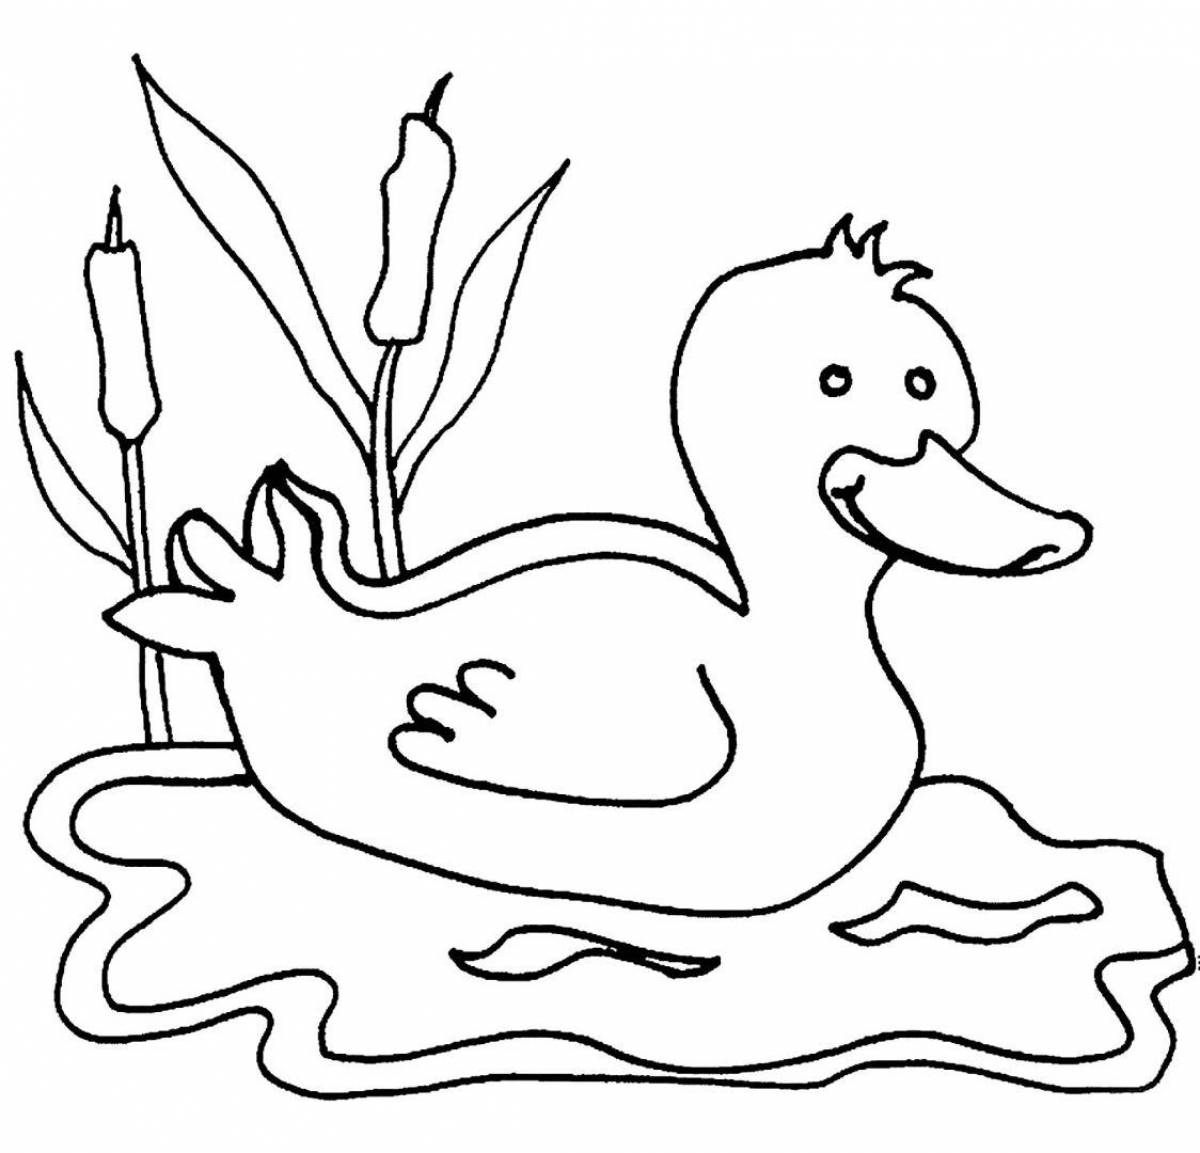 Radiant duck coloring book for kids